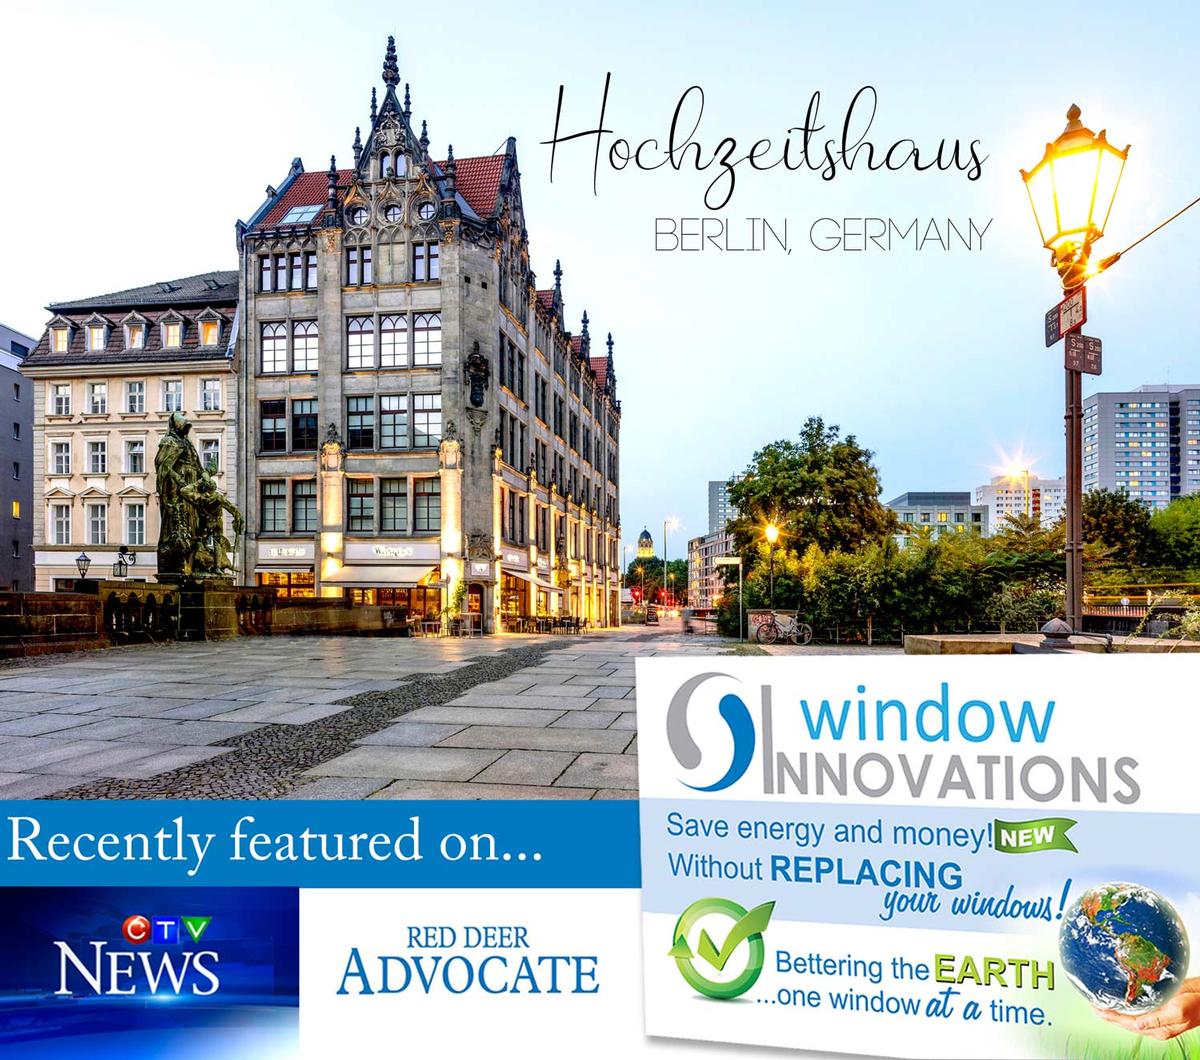 Hochzeitshaus Berlin Germany had 252 windows coated with the liquid glass insulation offered by Windows Innovations.  Improving the efficiency of the windows by 75%